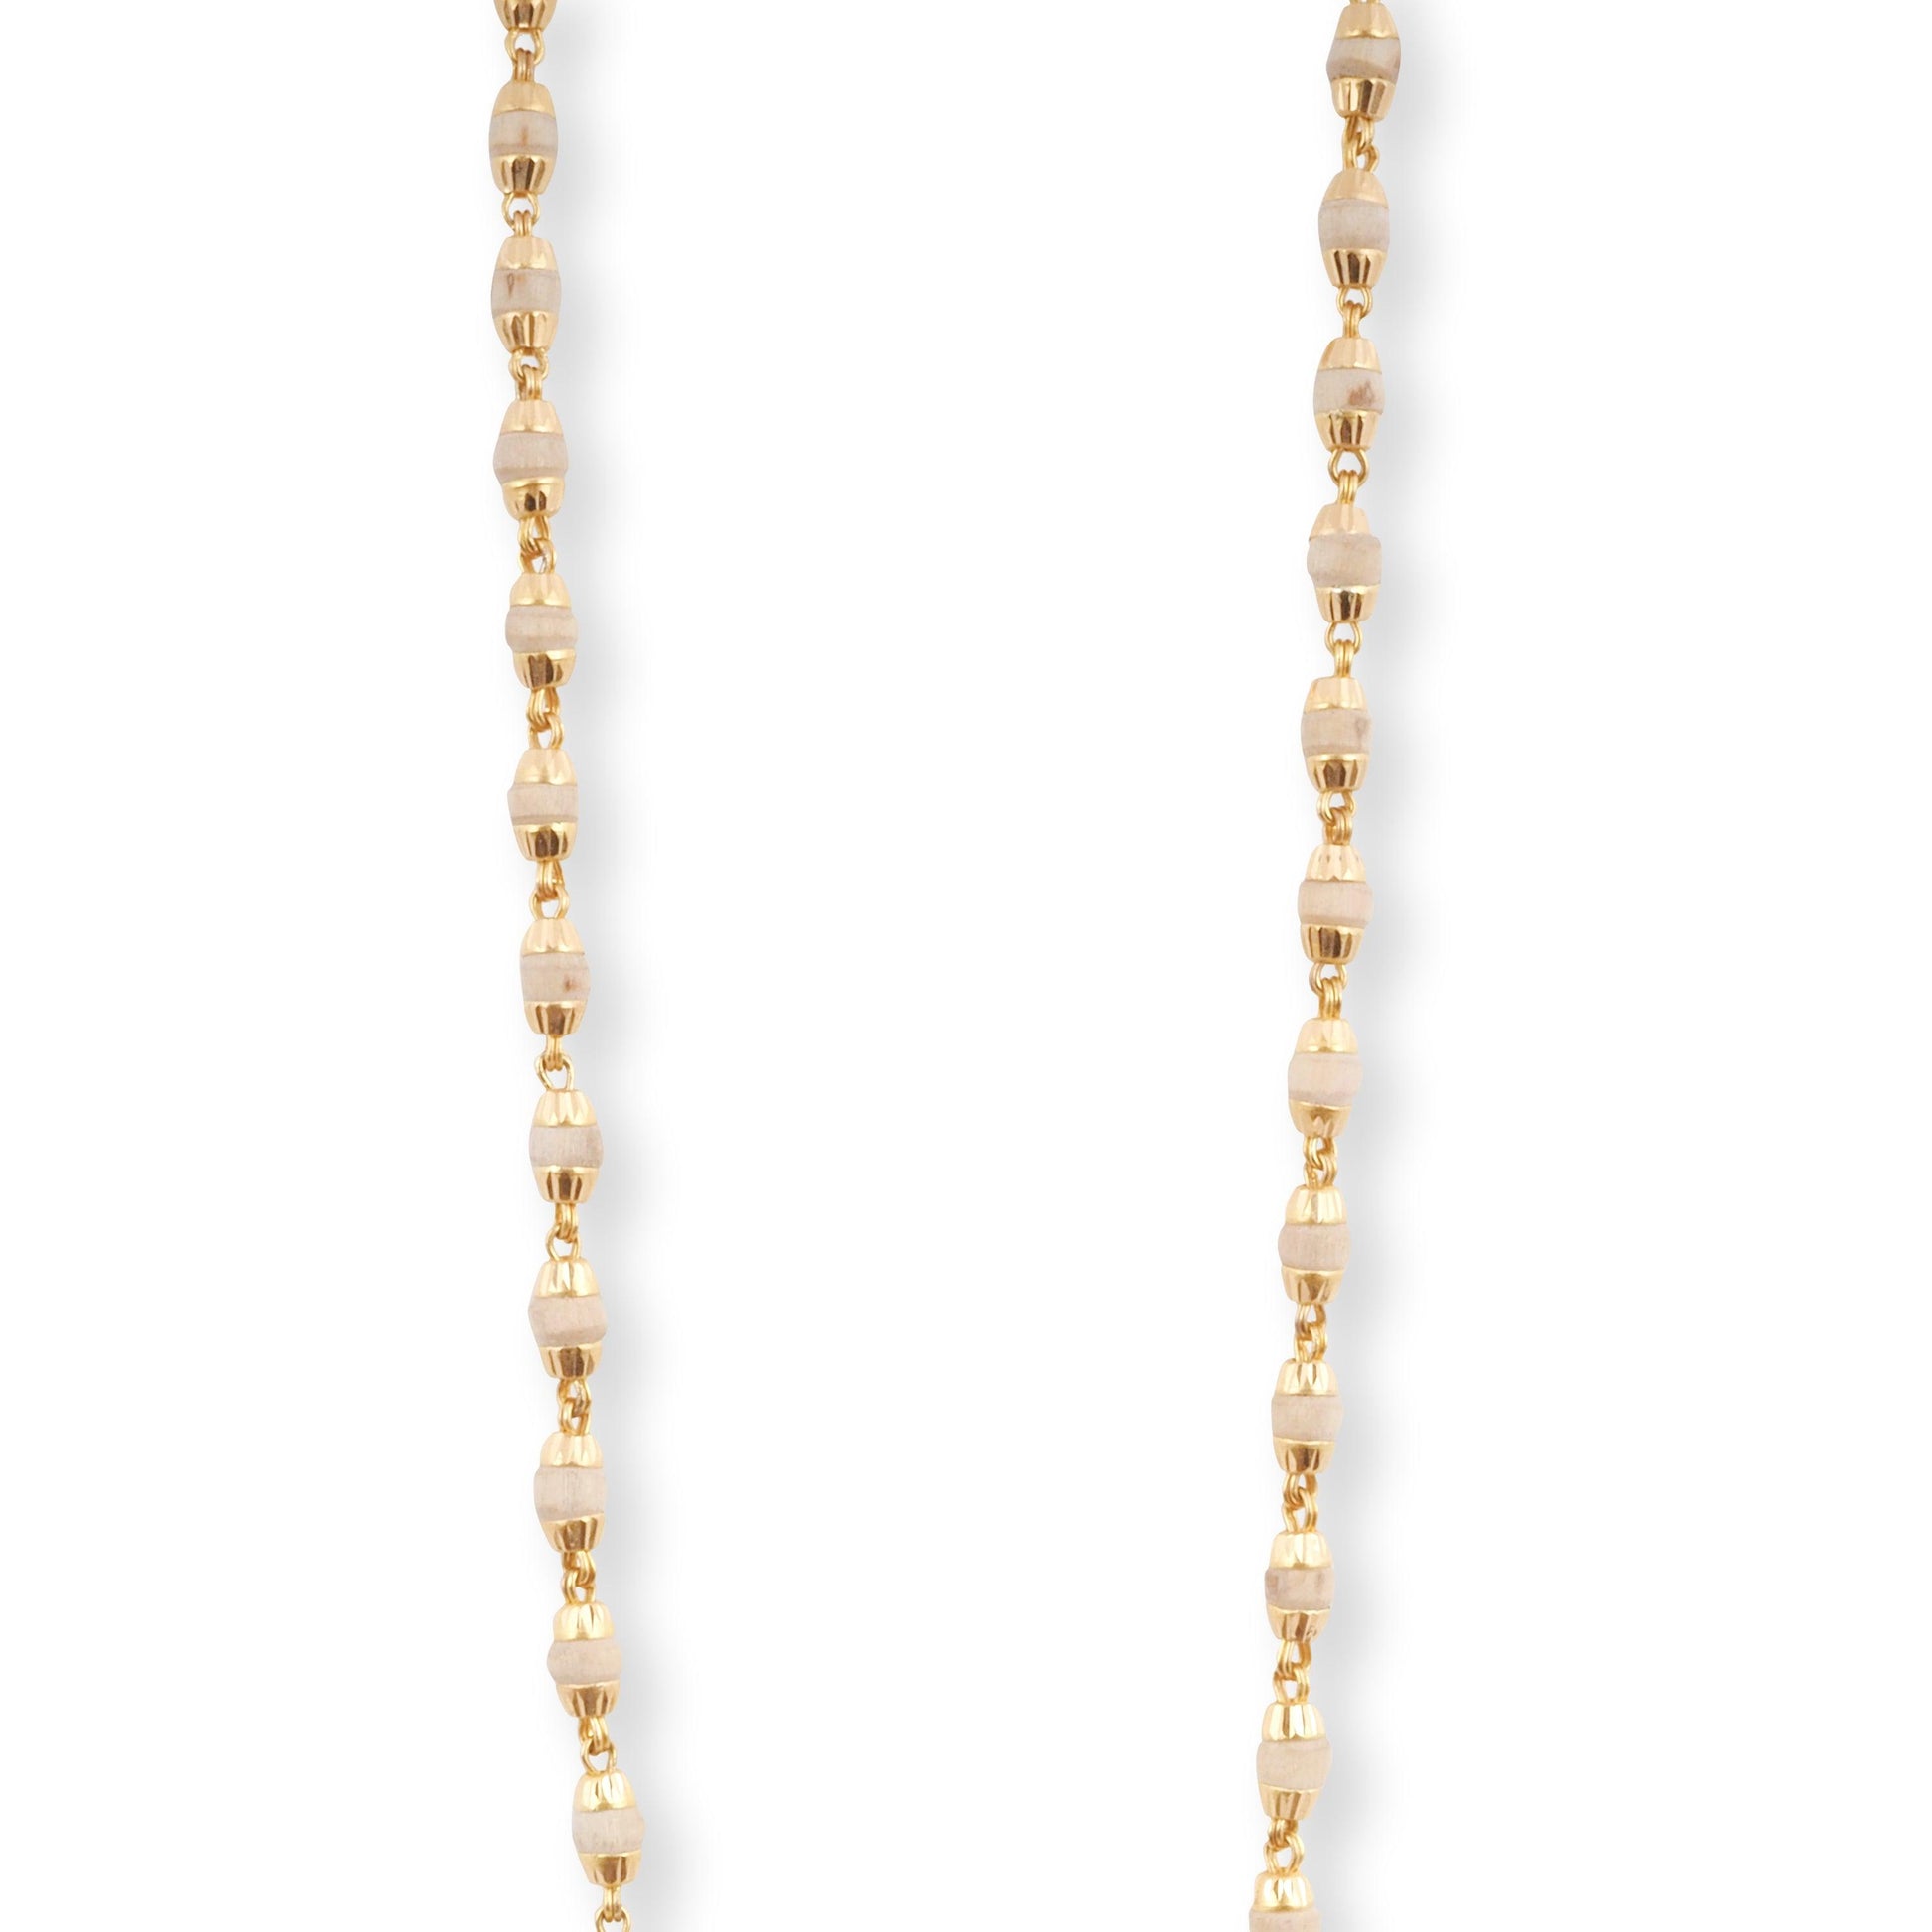 22ct Yellow Gold Chain with Tulsi Beads C-3811 - Minar Jewellers